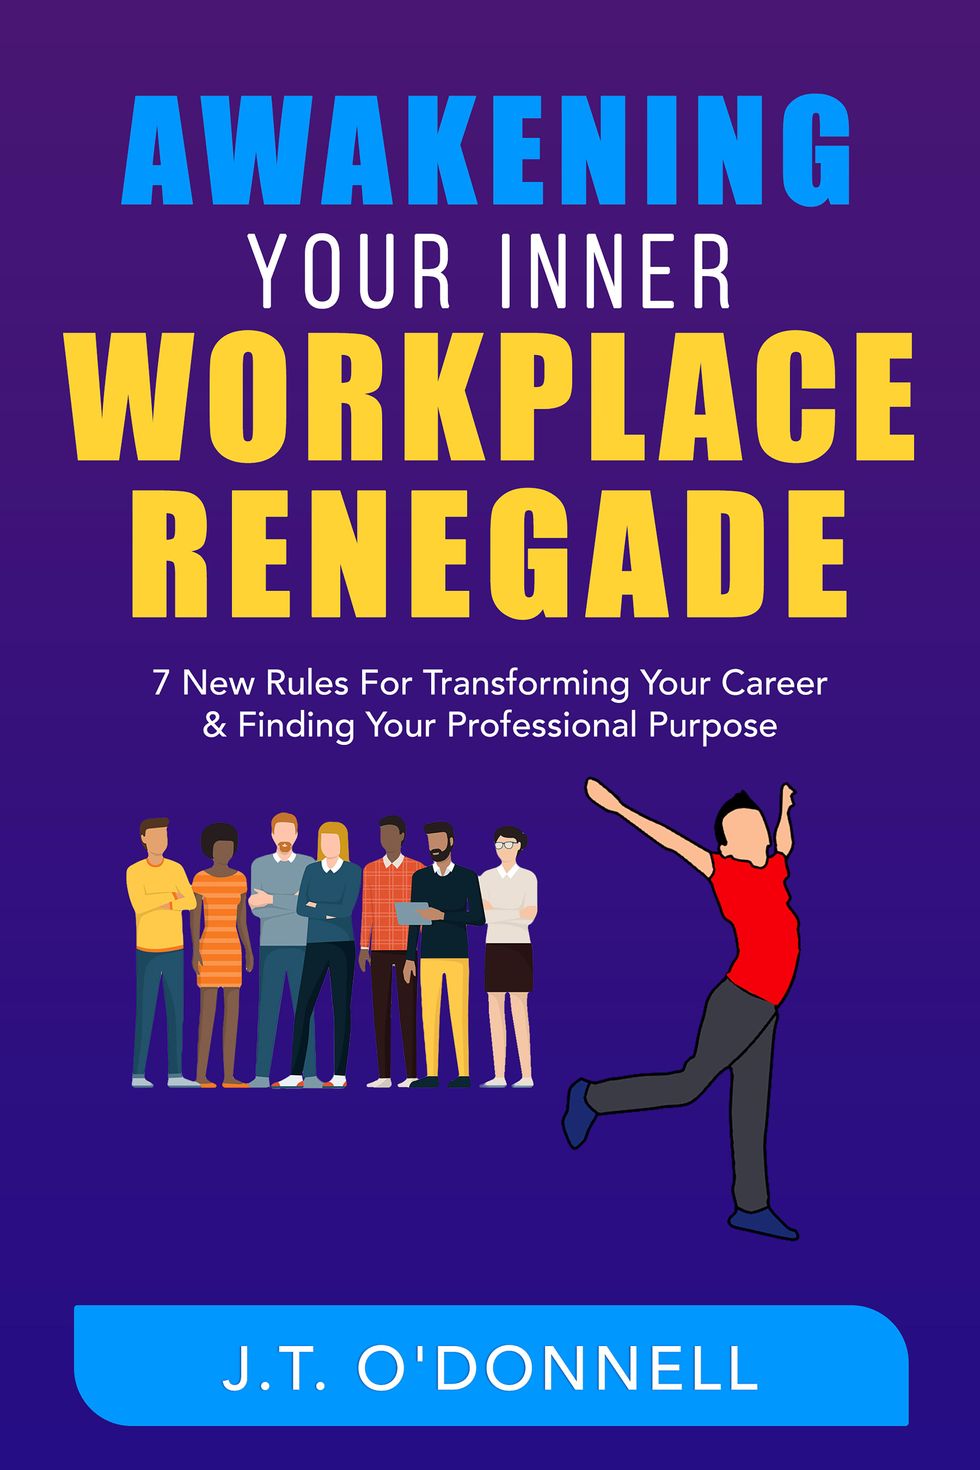 Awakening Your Inner Workplace Renegade by J.T. O'Donnell